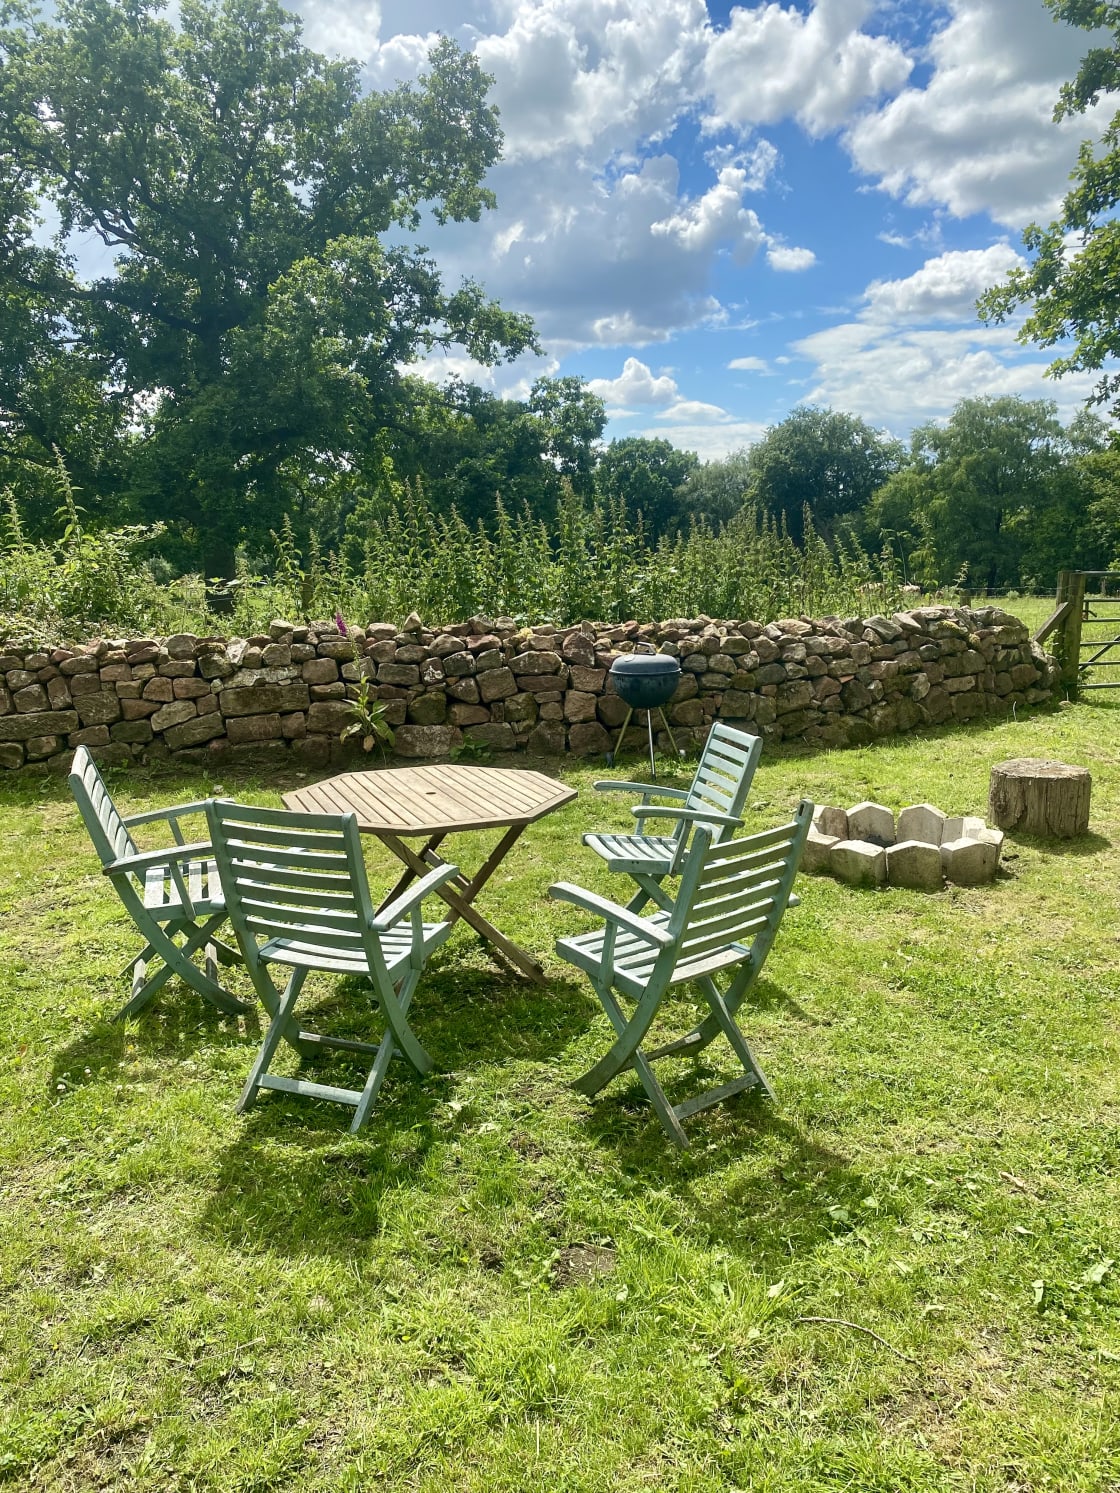 Our outdoor seating area complete with fire pit for toasting marshmallows by and the barbecue for those alfresco meals.